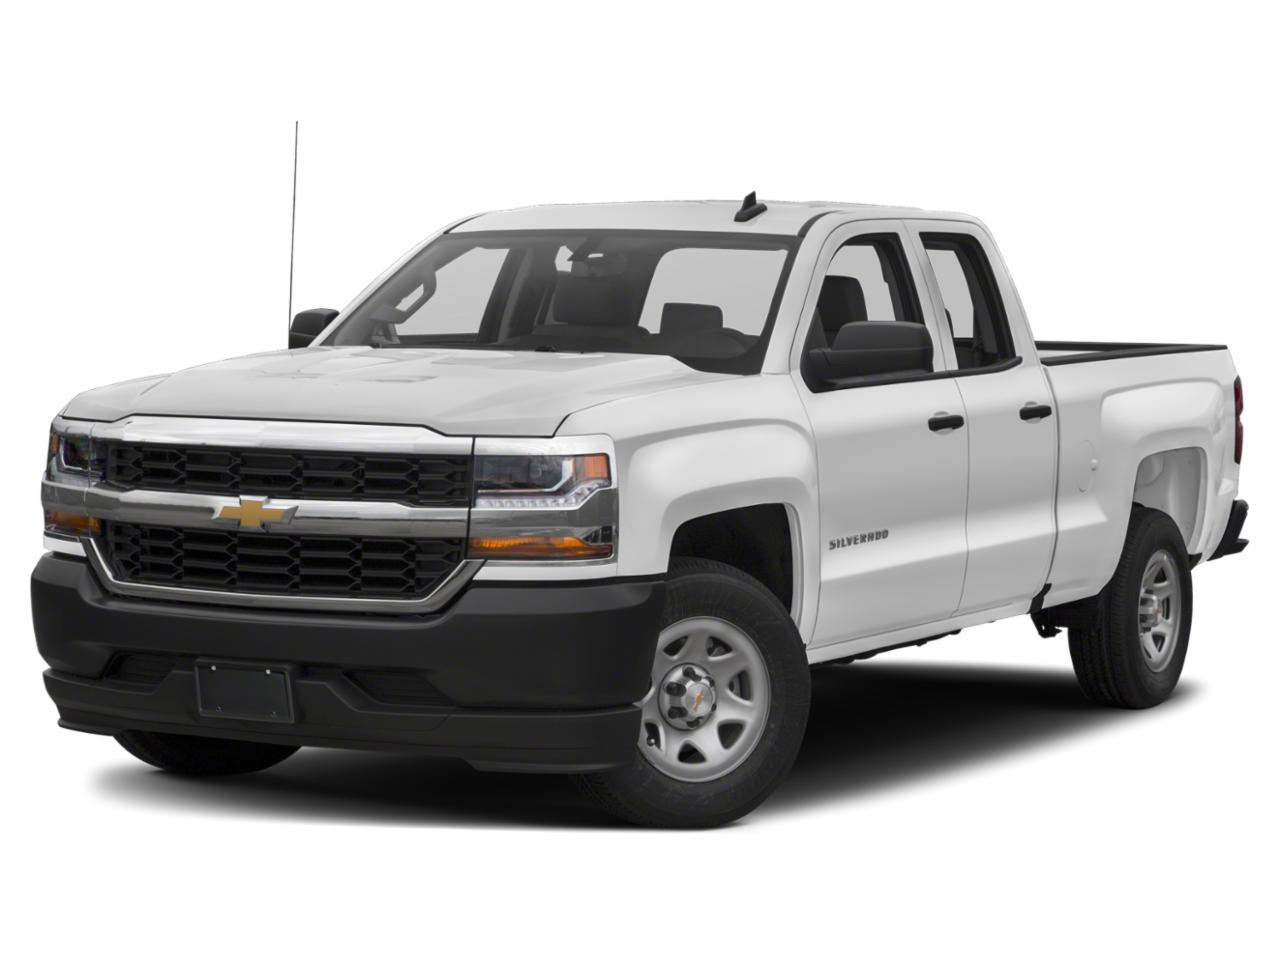 2019 Chevrolet Silverado 1500 LD Vehicle Photo in CLEARWATER, FL 33764-7163